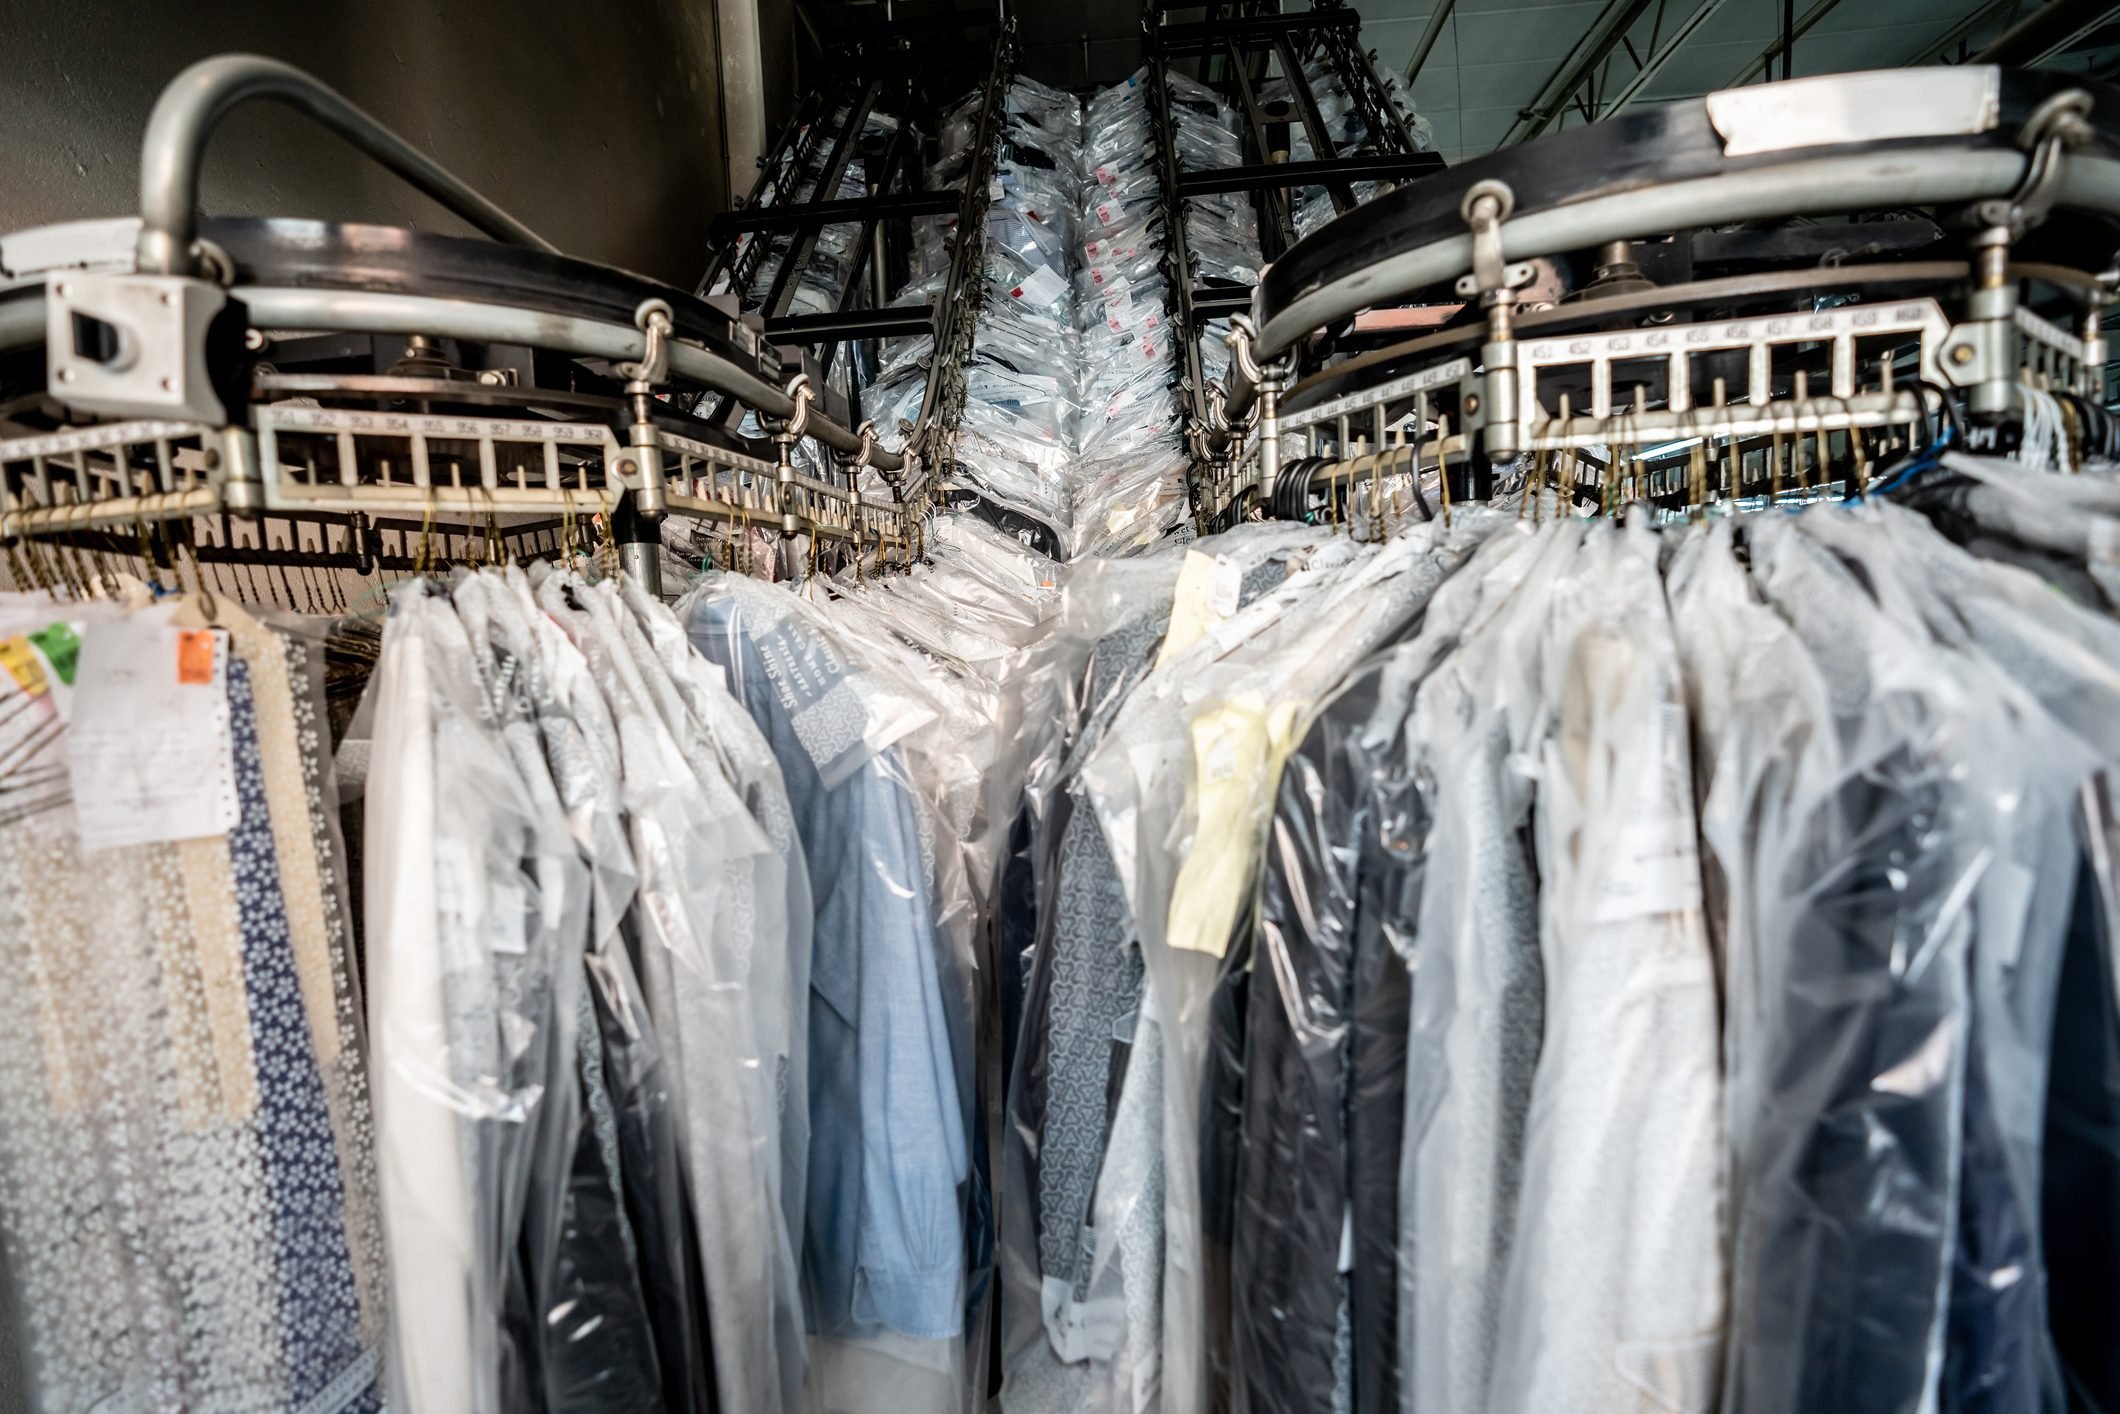 Ruined clothes? Dry cleaning customers have rights